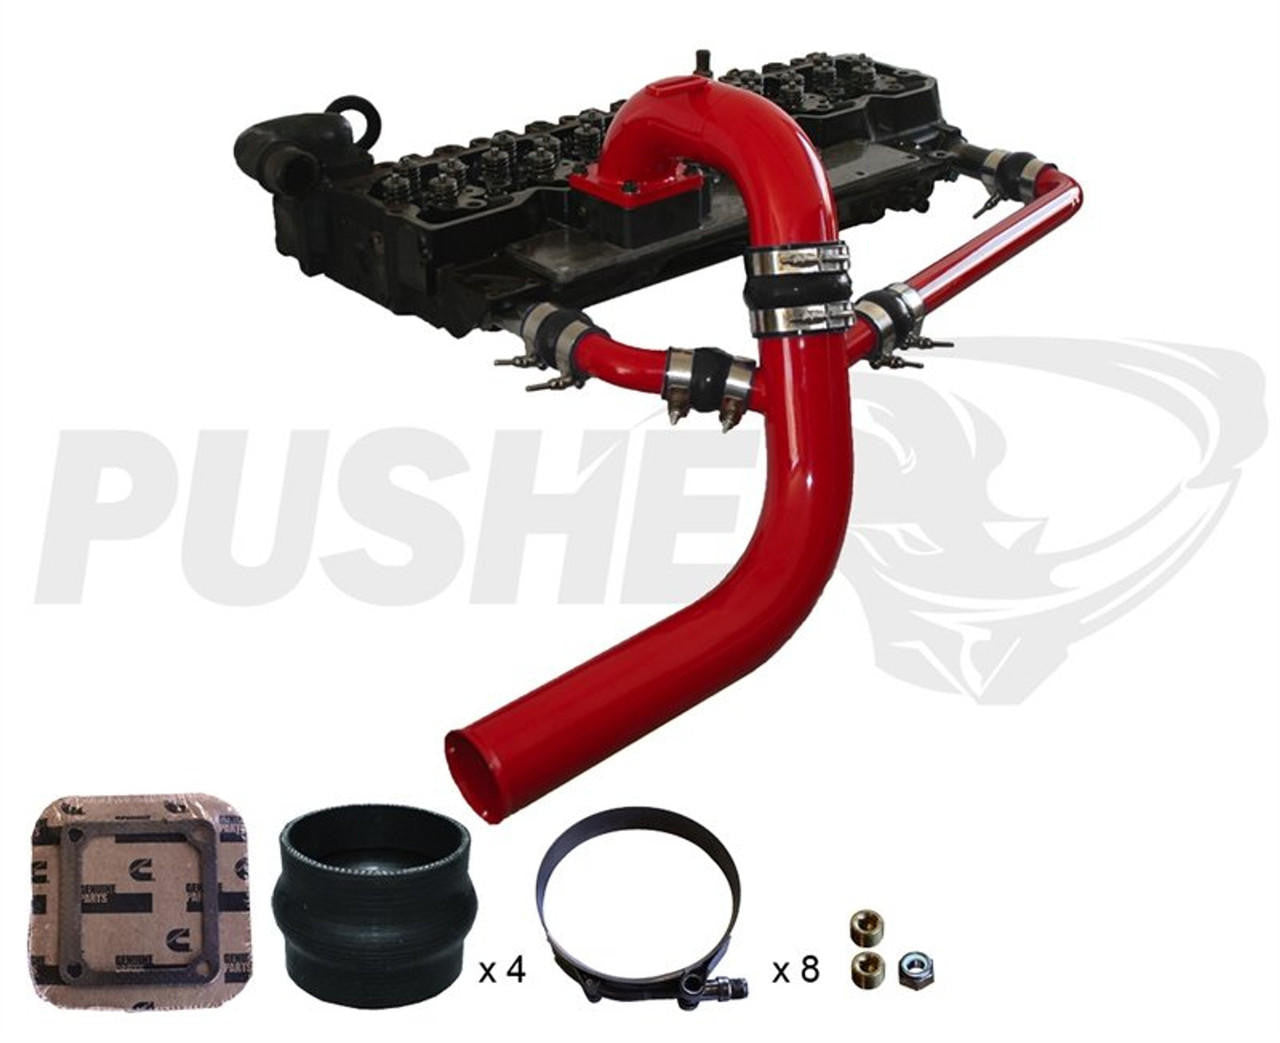 Pusher Intakes Pusher 3" Intake Manifold and 3" Cross-Air Package for 2003-2007 Dodge Cummins VAR-PDC0307CAK 